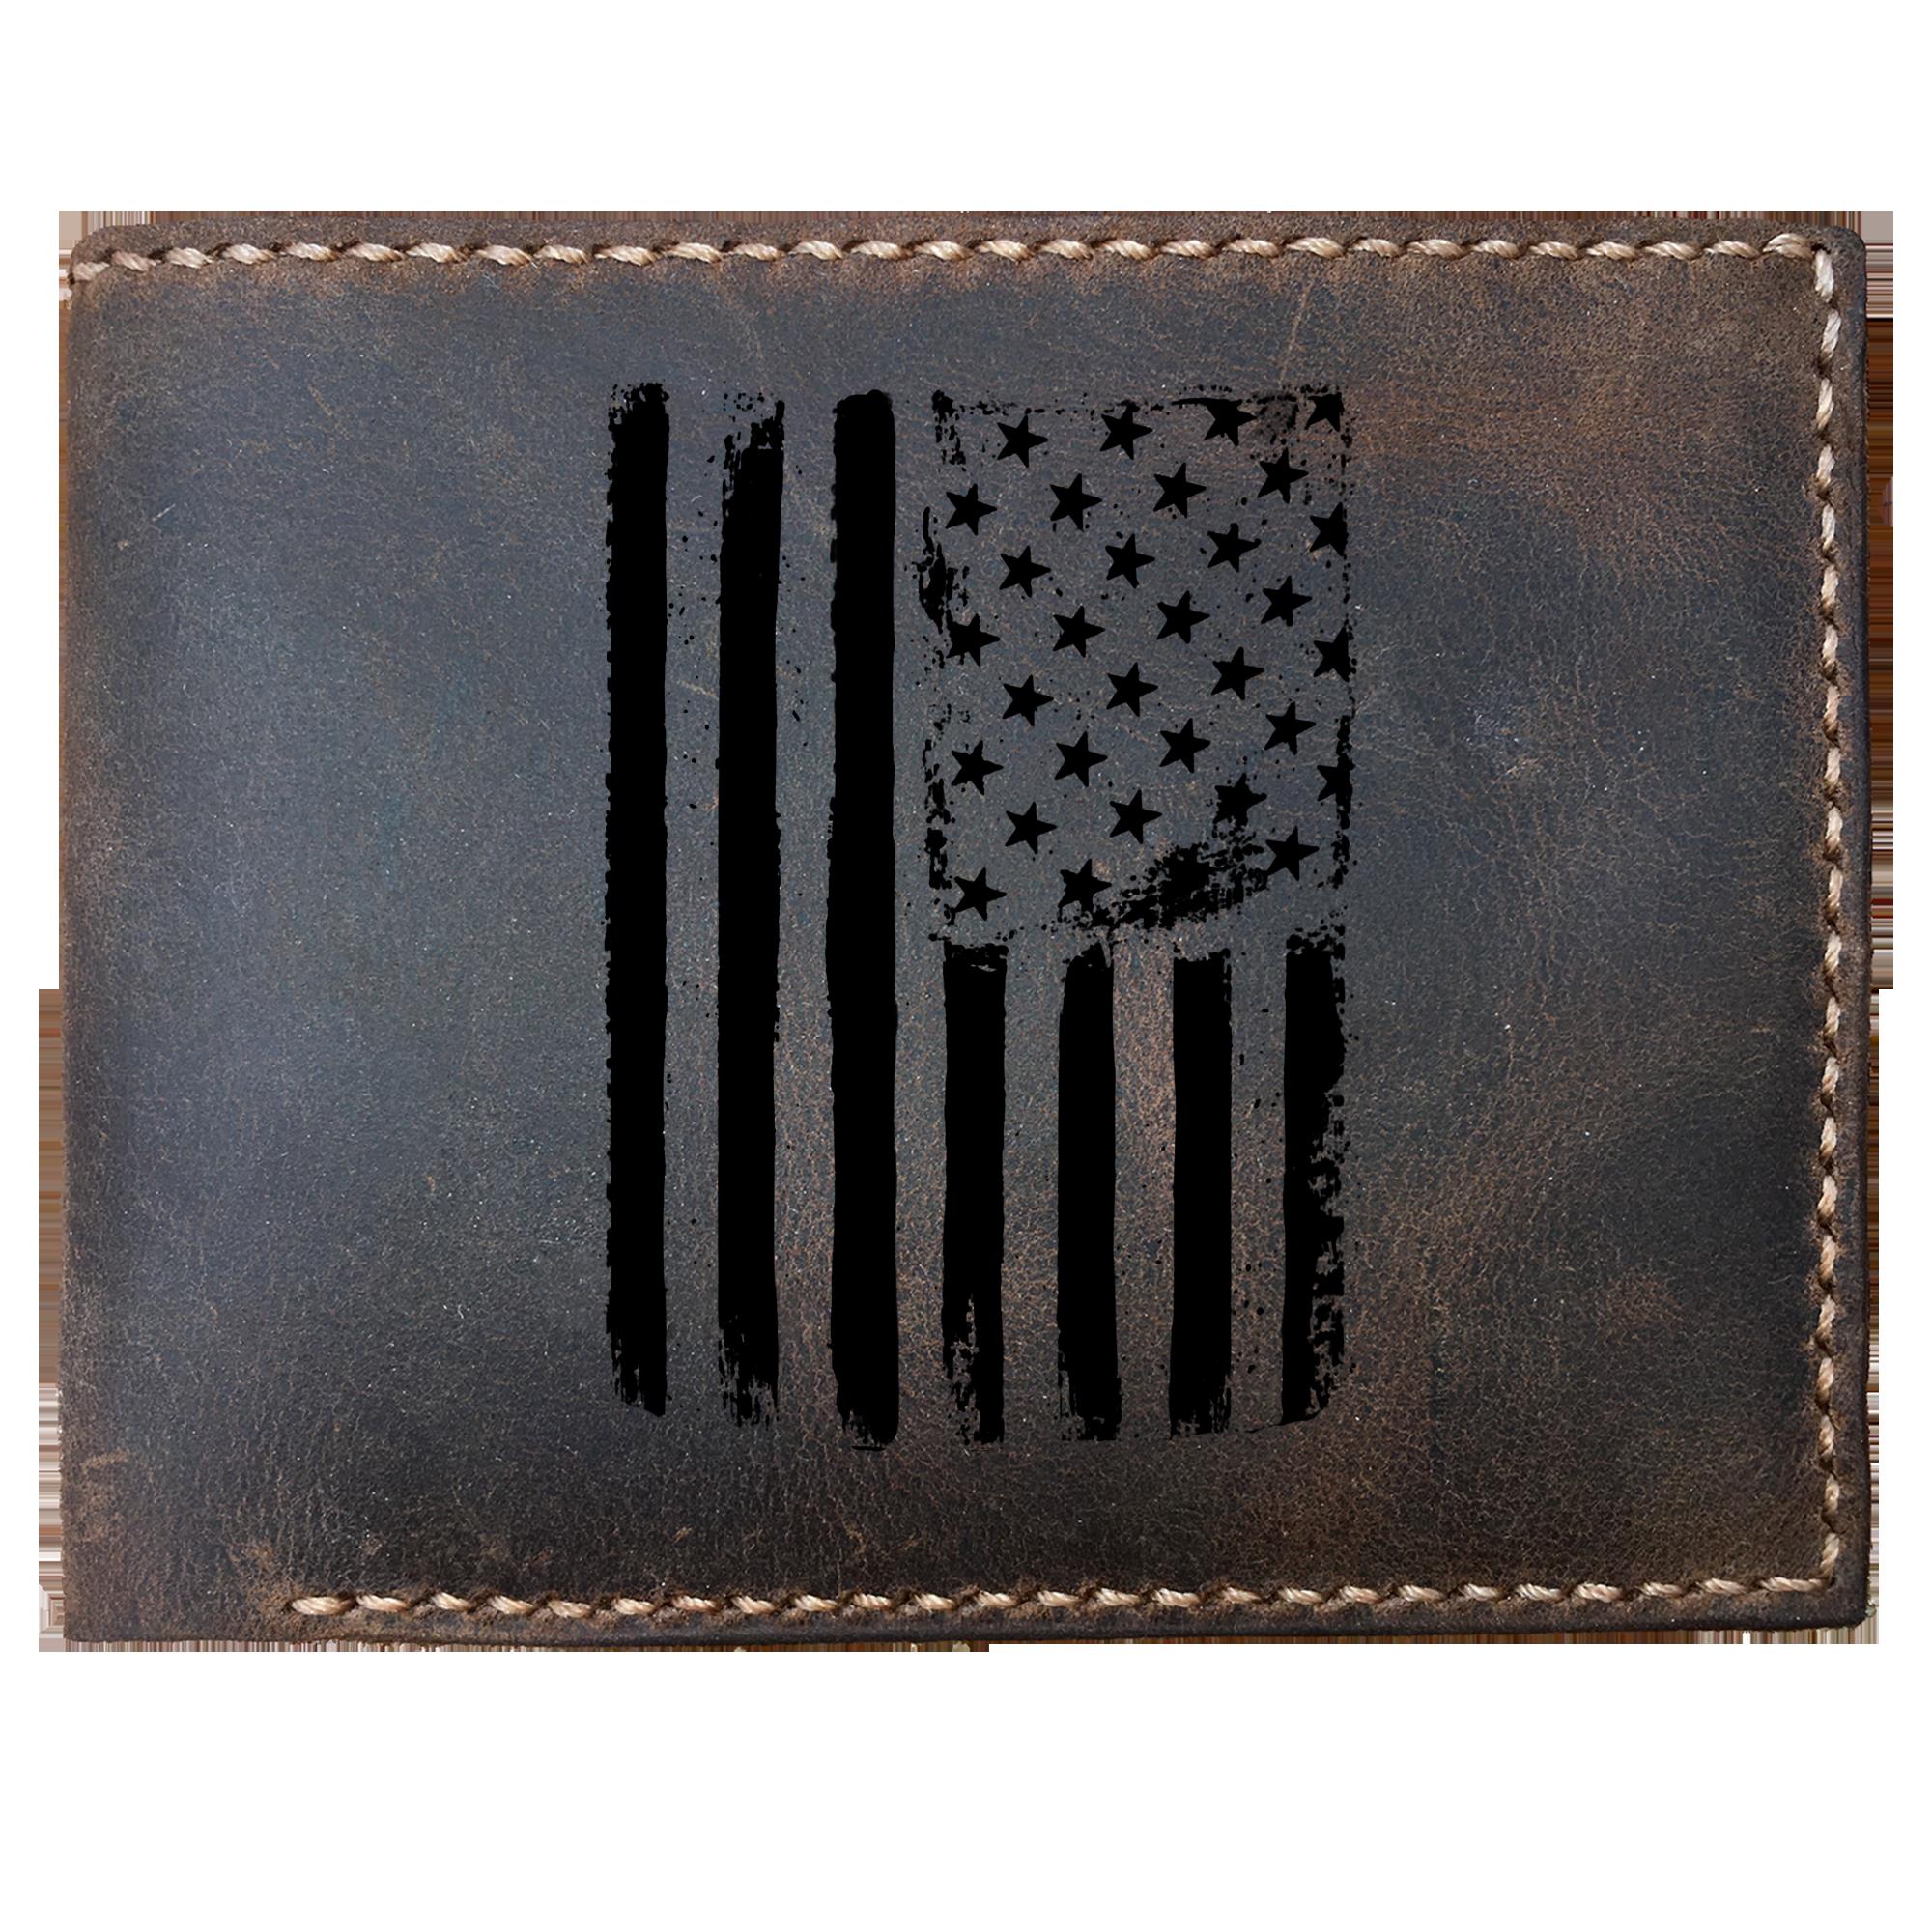 Skitongifts Funny Custom Laser Engraved Bifold Leather Wallet For Men, Thin Blue Line Uniques